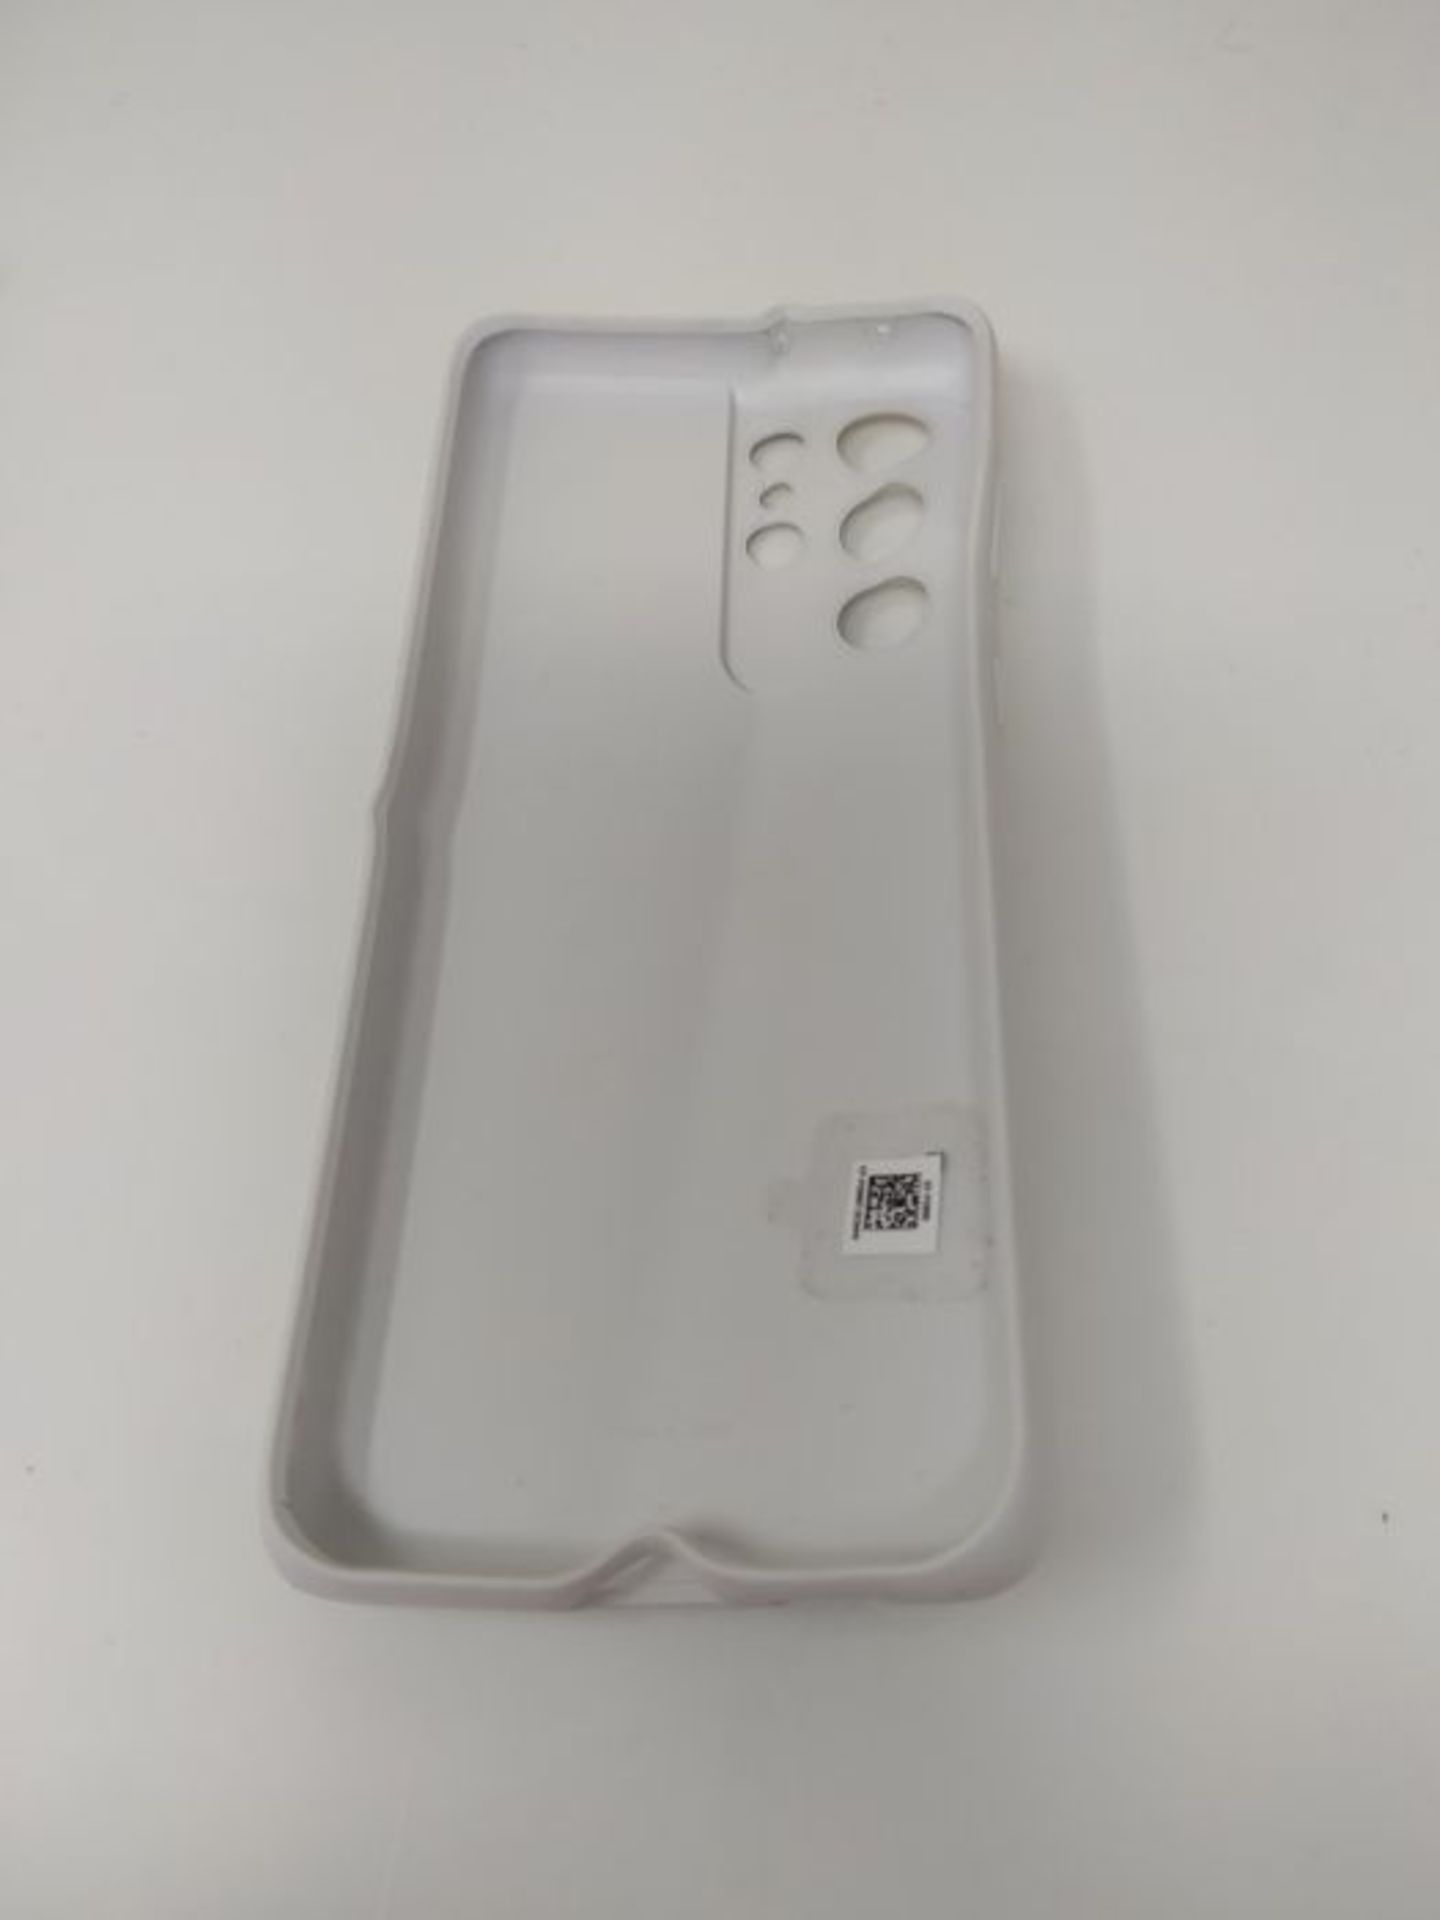 Samsung Galaxy S21 Ultra 5G Silicone Cover Light Gray - 6.8 inches - Image 2 of 2